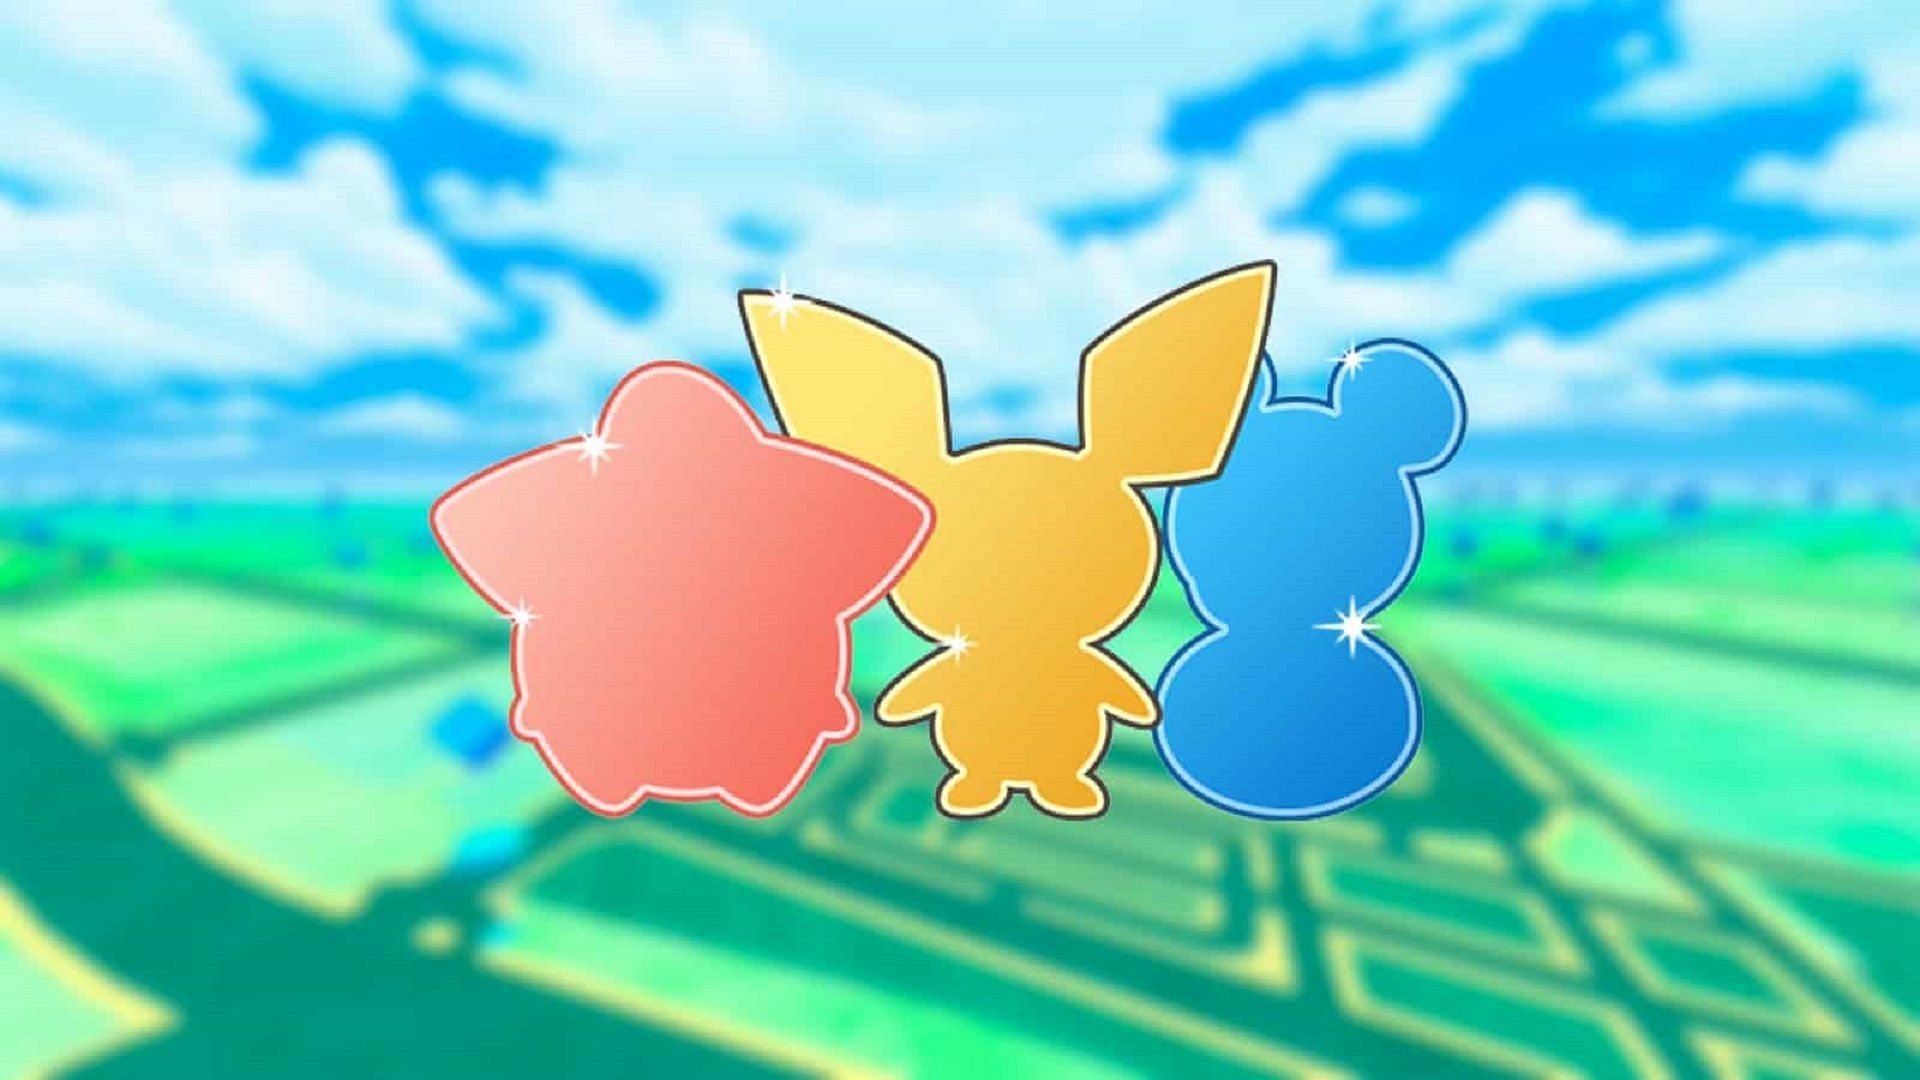 The Little Cup in Pokemon GO limits trainers to using non-evolved low-CP Pocket Monsters.